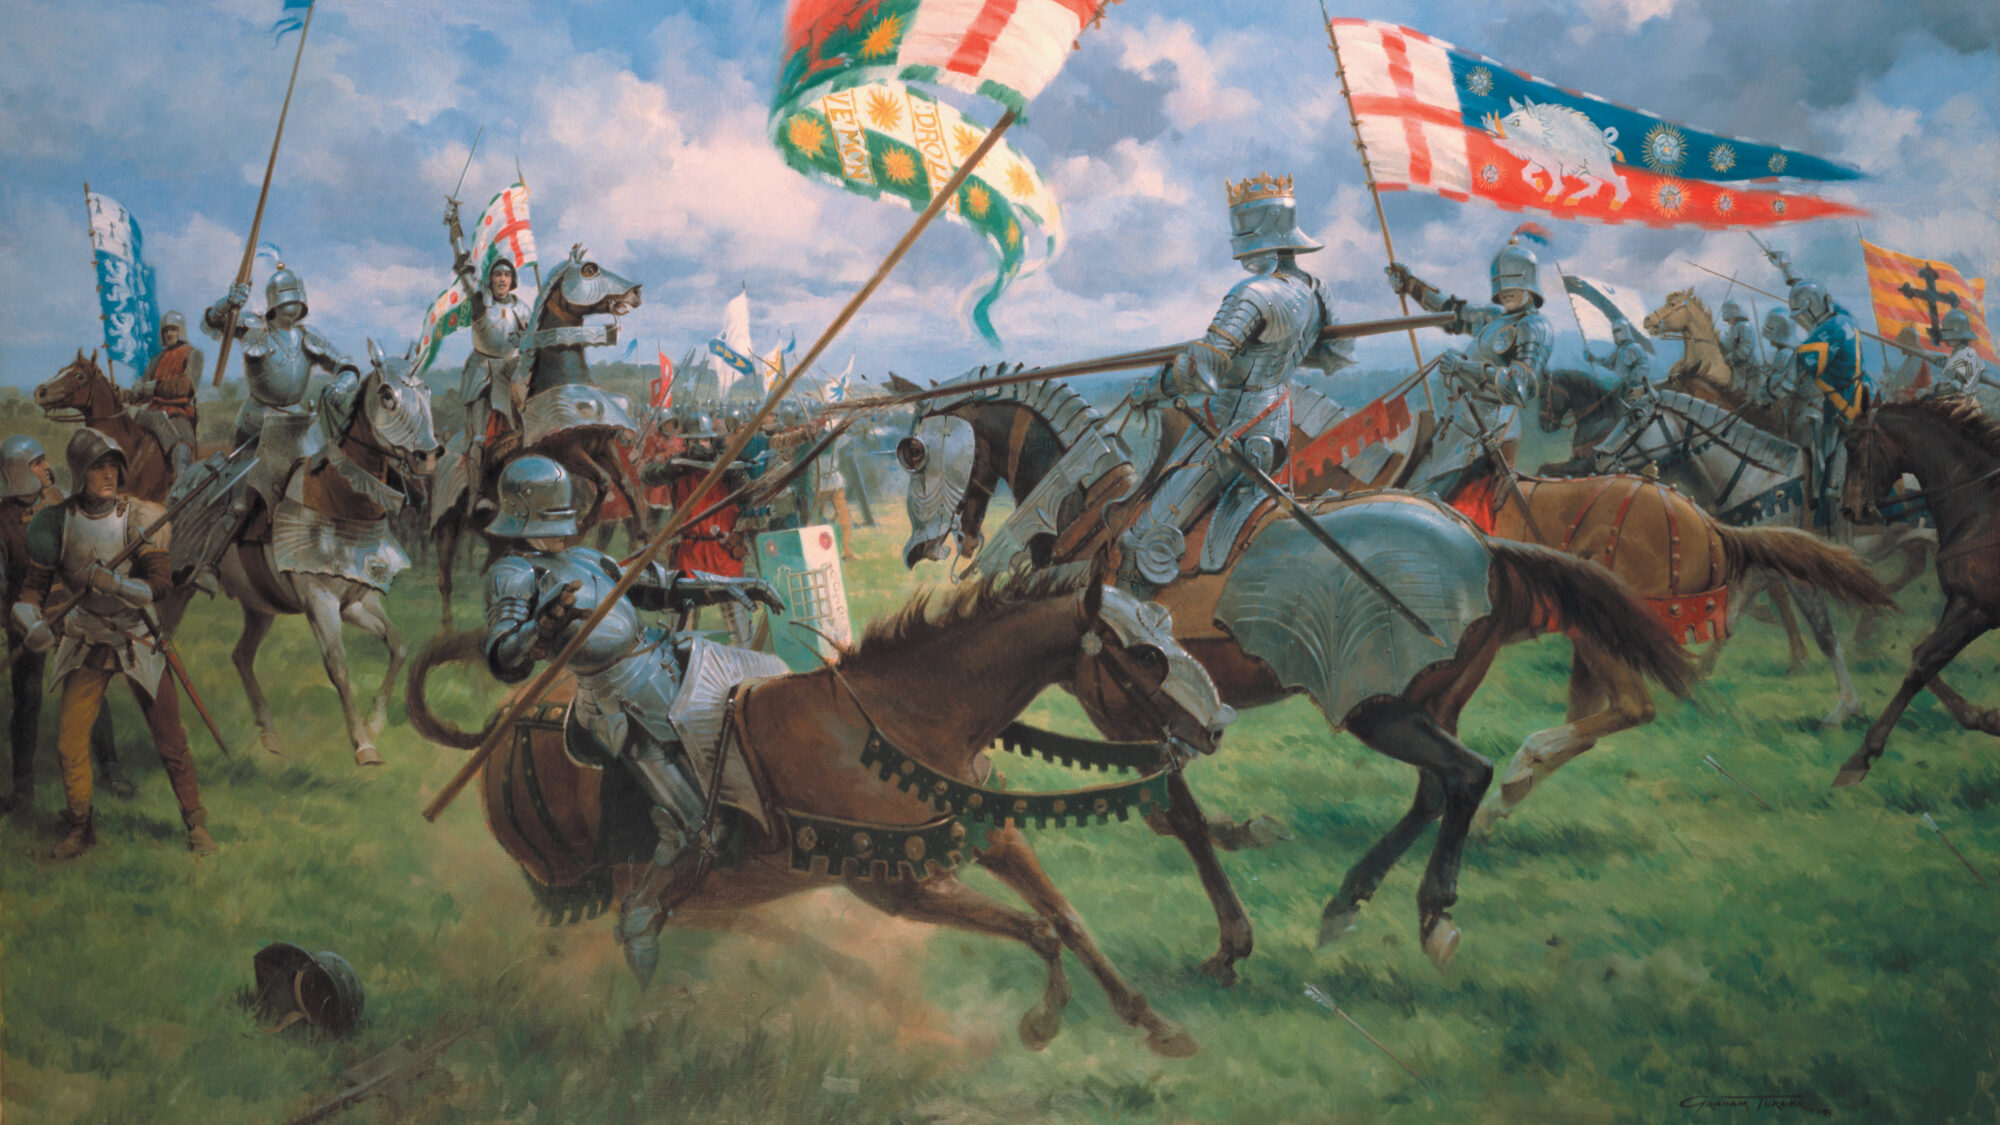 A golden crown atop his helmet, Richard III impales Henry’s standard bearer, William Brandon, with his lance at the climax of the Battle of Bosworth Field. Painting by noted military artist Graham Turner.